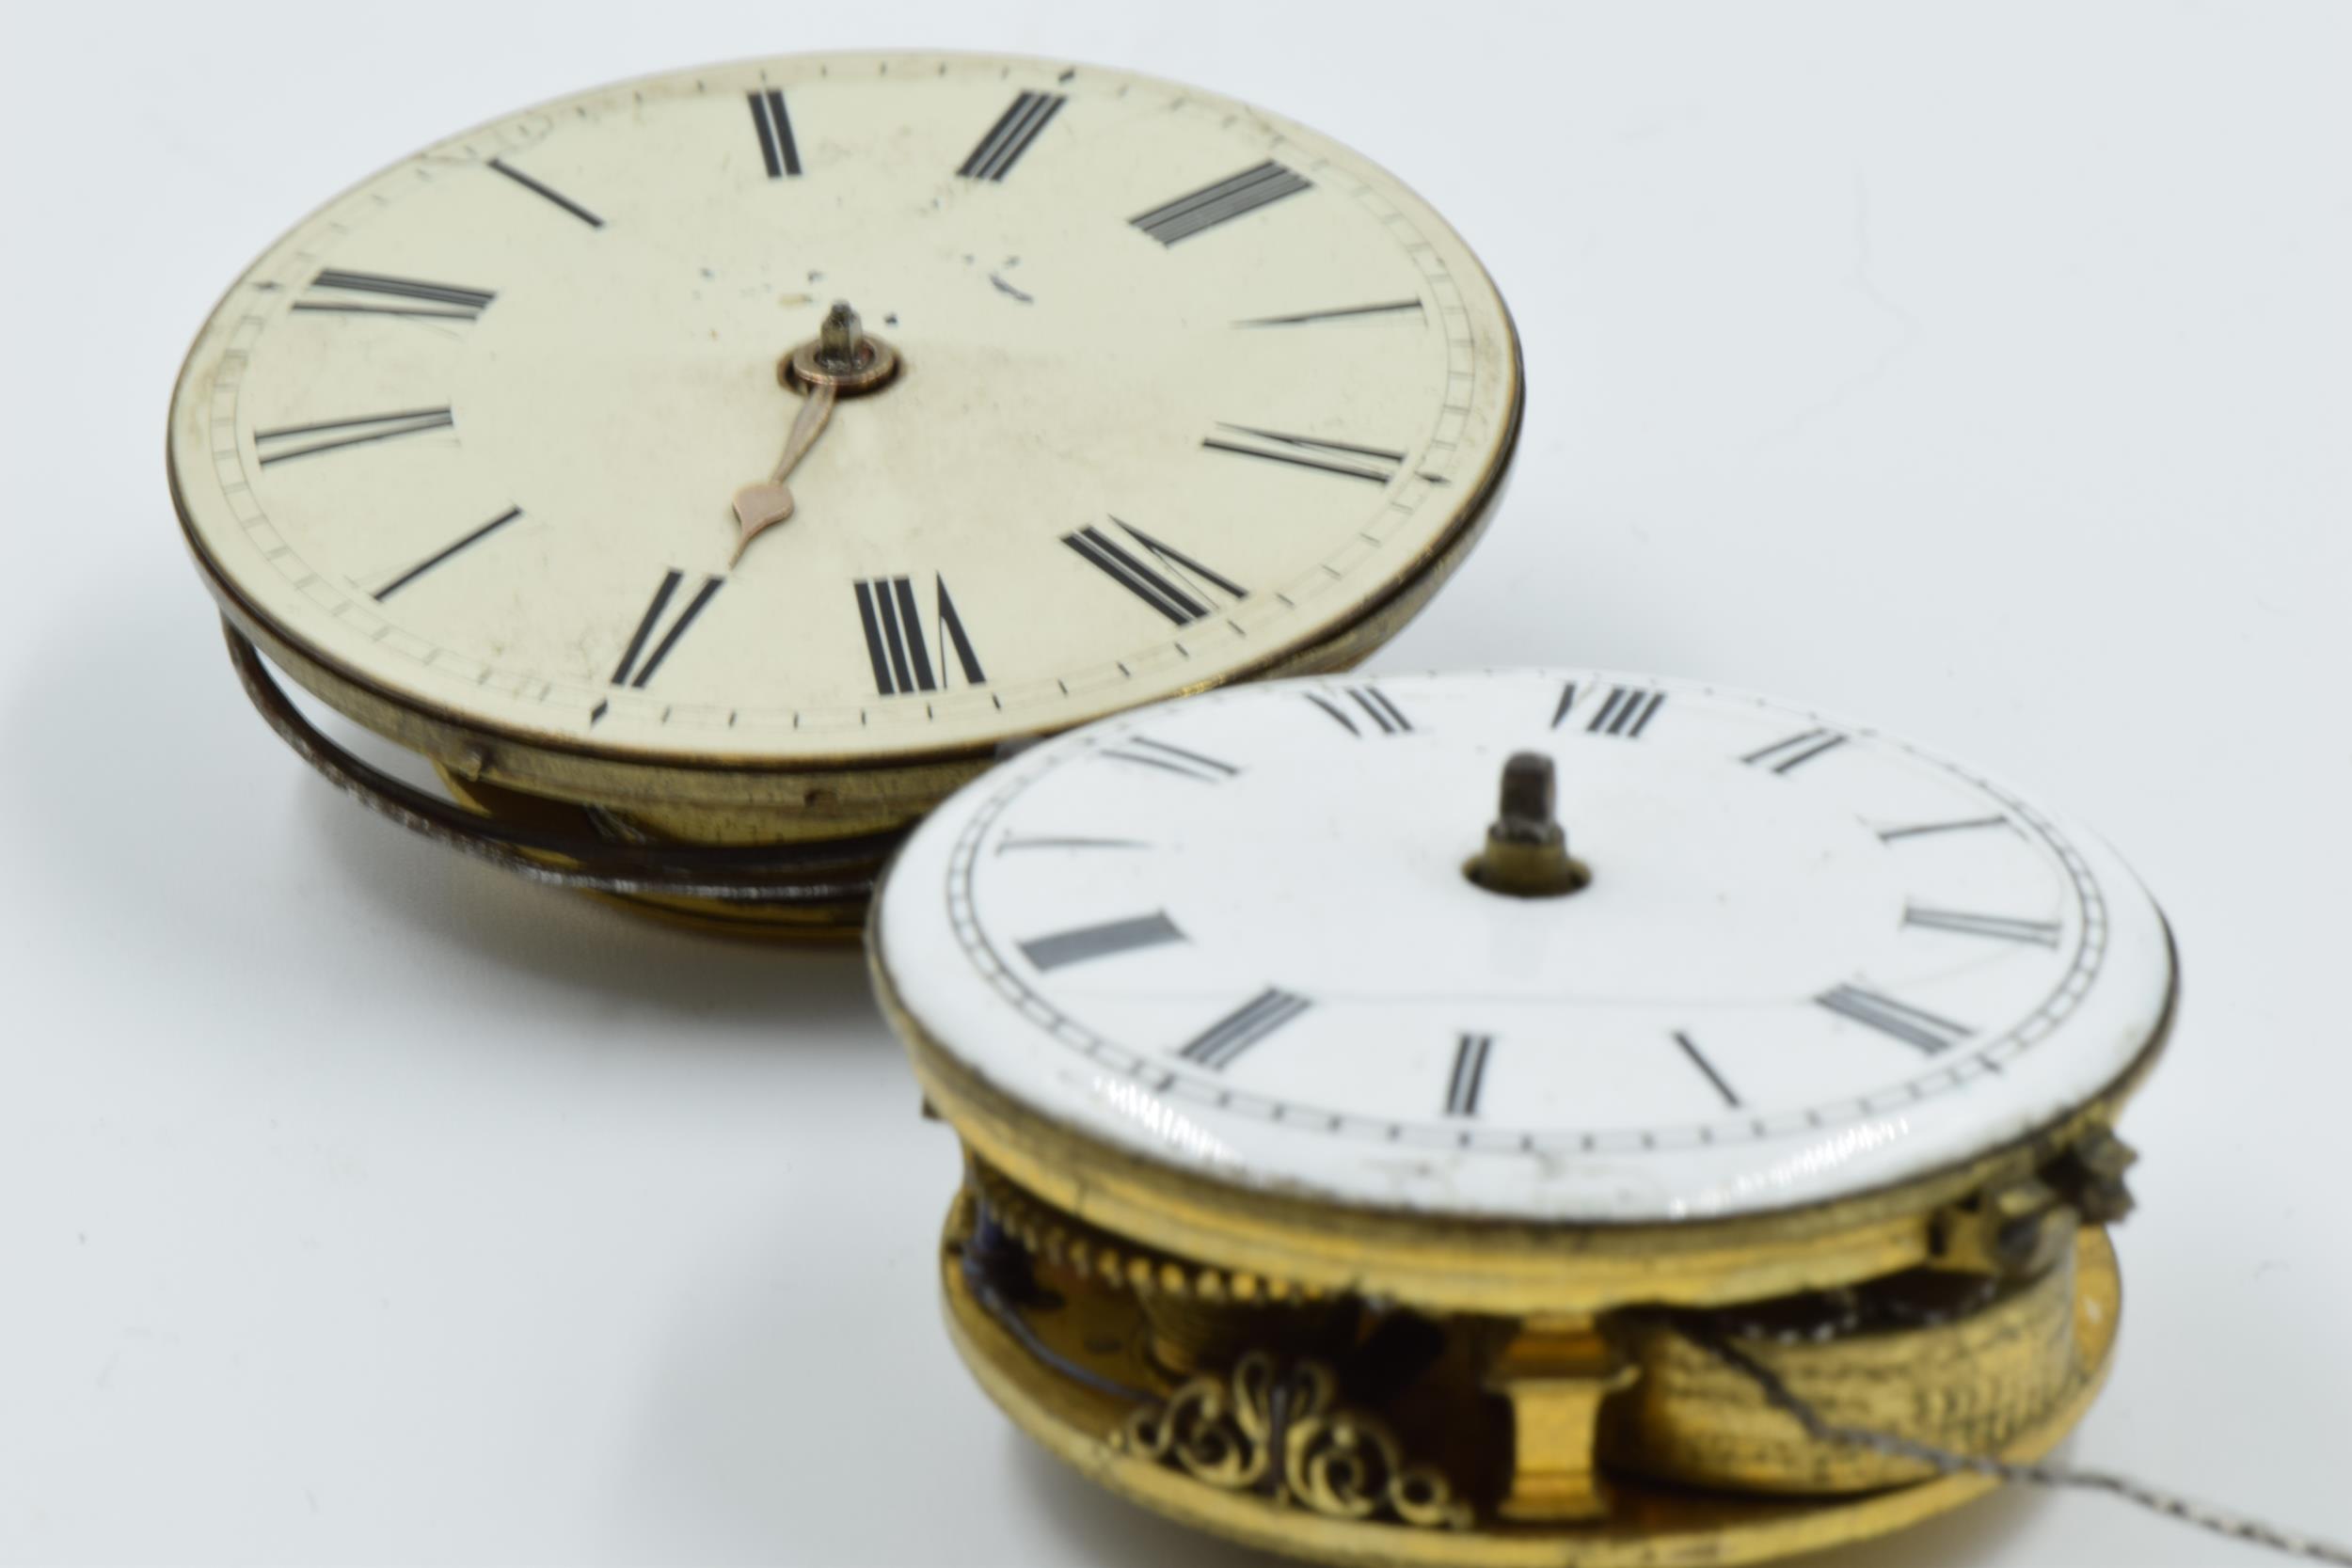 18th Century English chiming pocket watch movement by Thomas Barber, London, with 43mm enamel dial